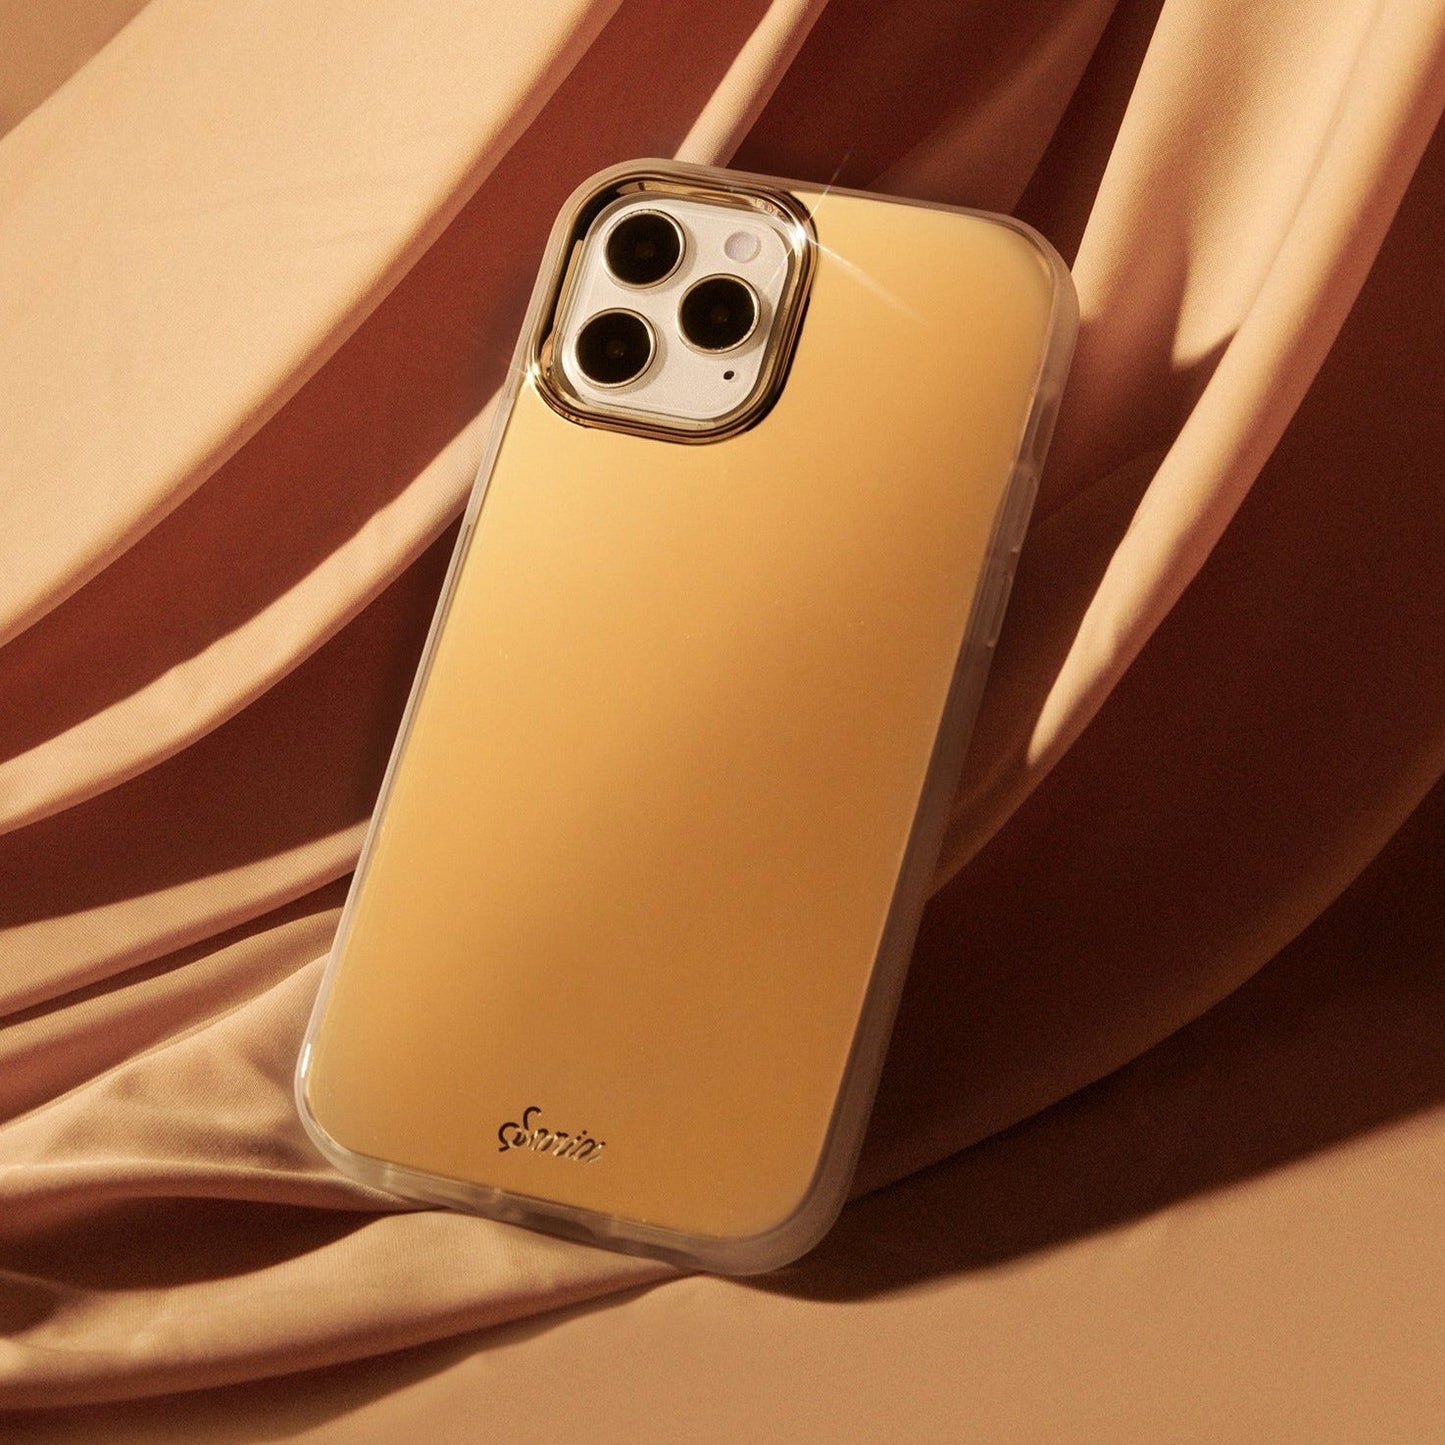 a metallic gold design shown on an iphone 12 mini with a gold satin background